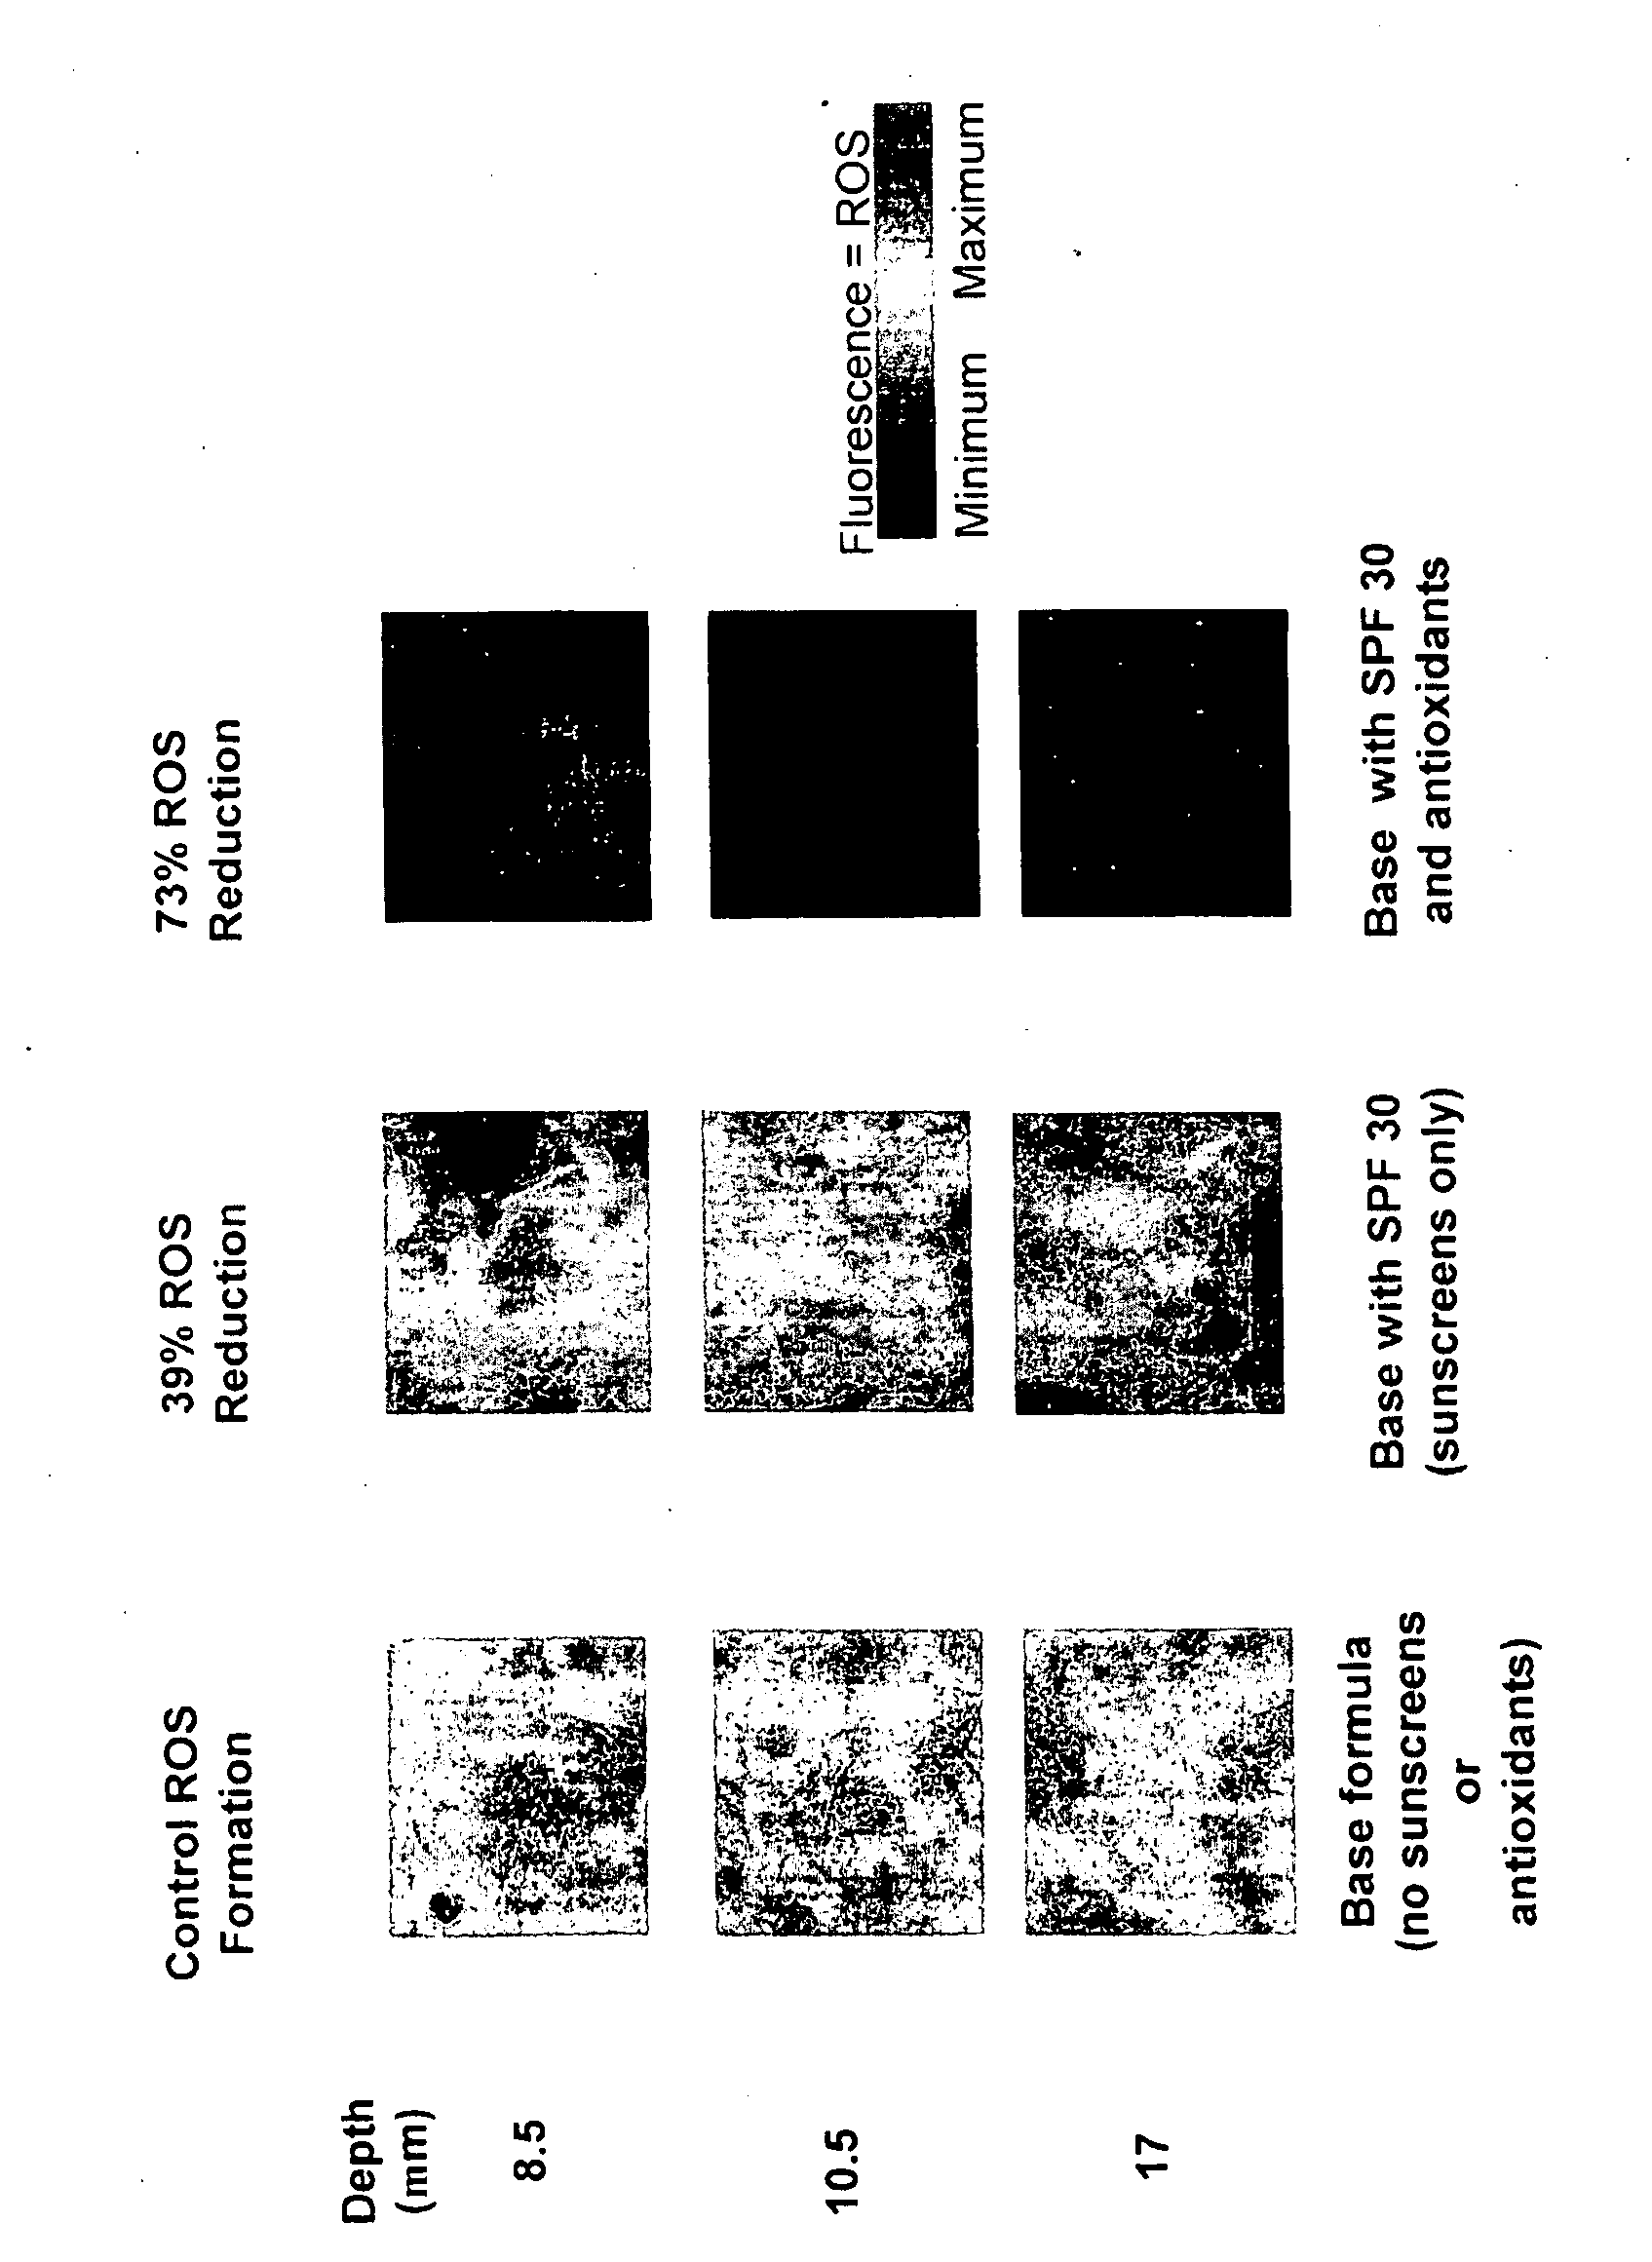 Method of selecting antioxidants for use in topically applied compositions